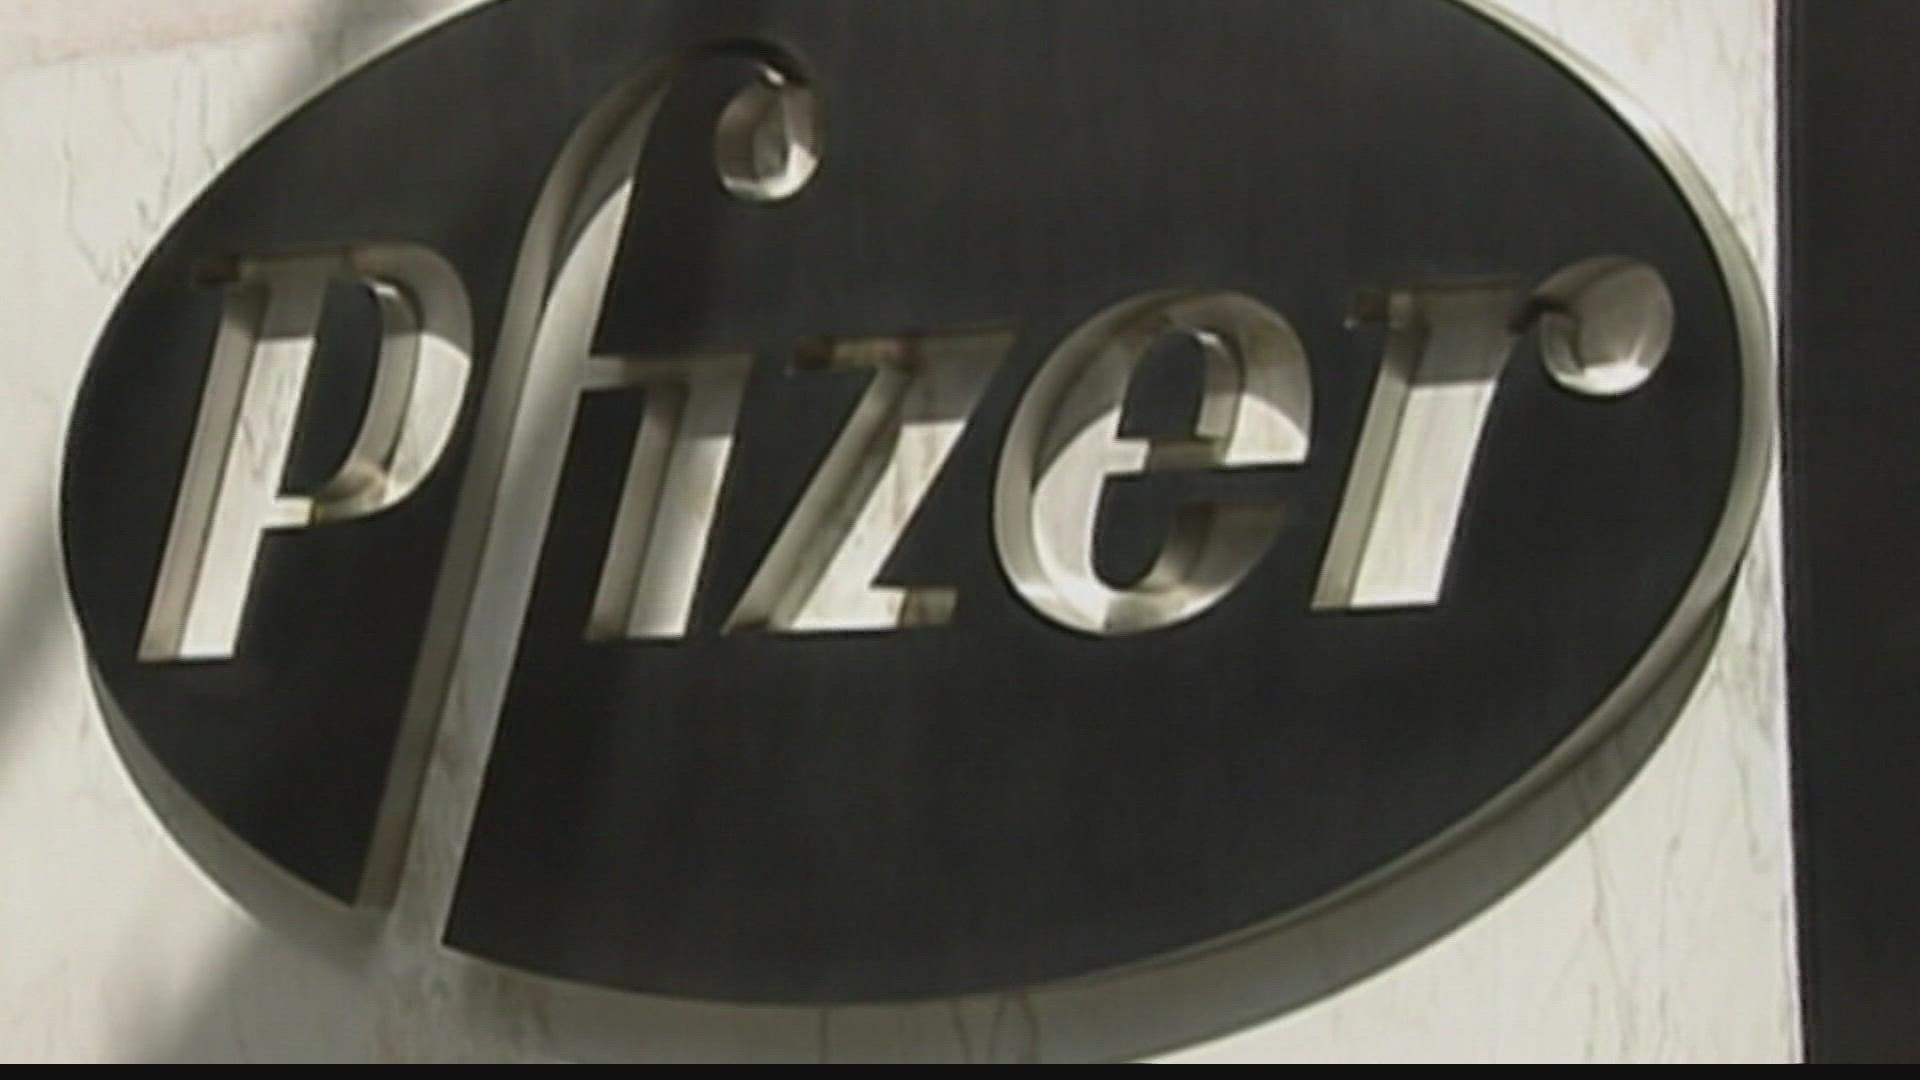 Three doses of Pfizer’s COVID-19 vaccine offer strong protection for children younger than 5. Pfizer plans to give the data to U.S. regulators to gain approval.